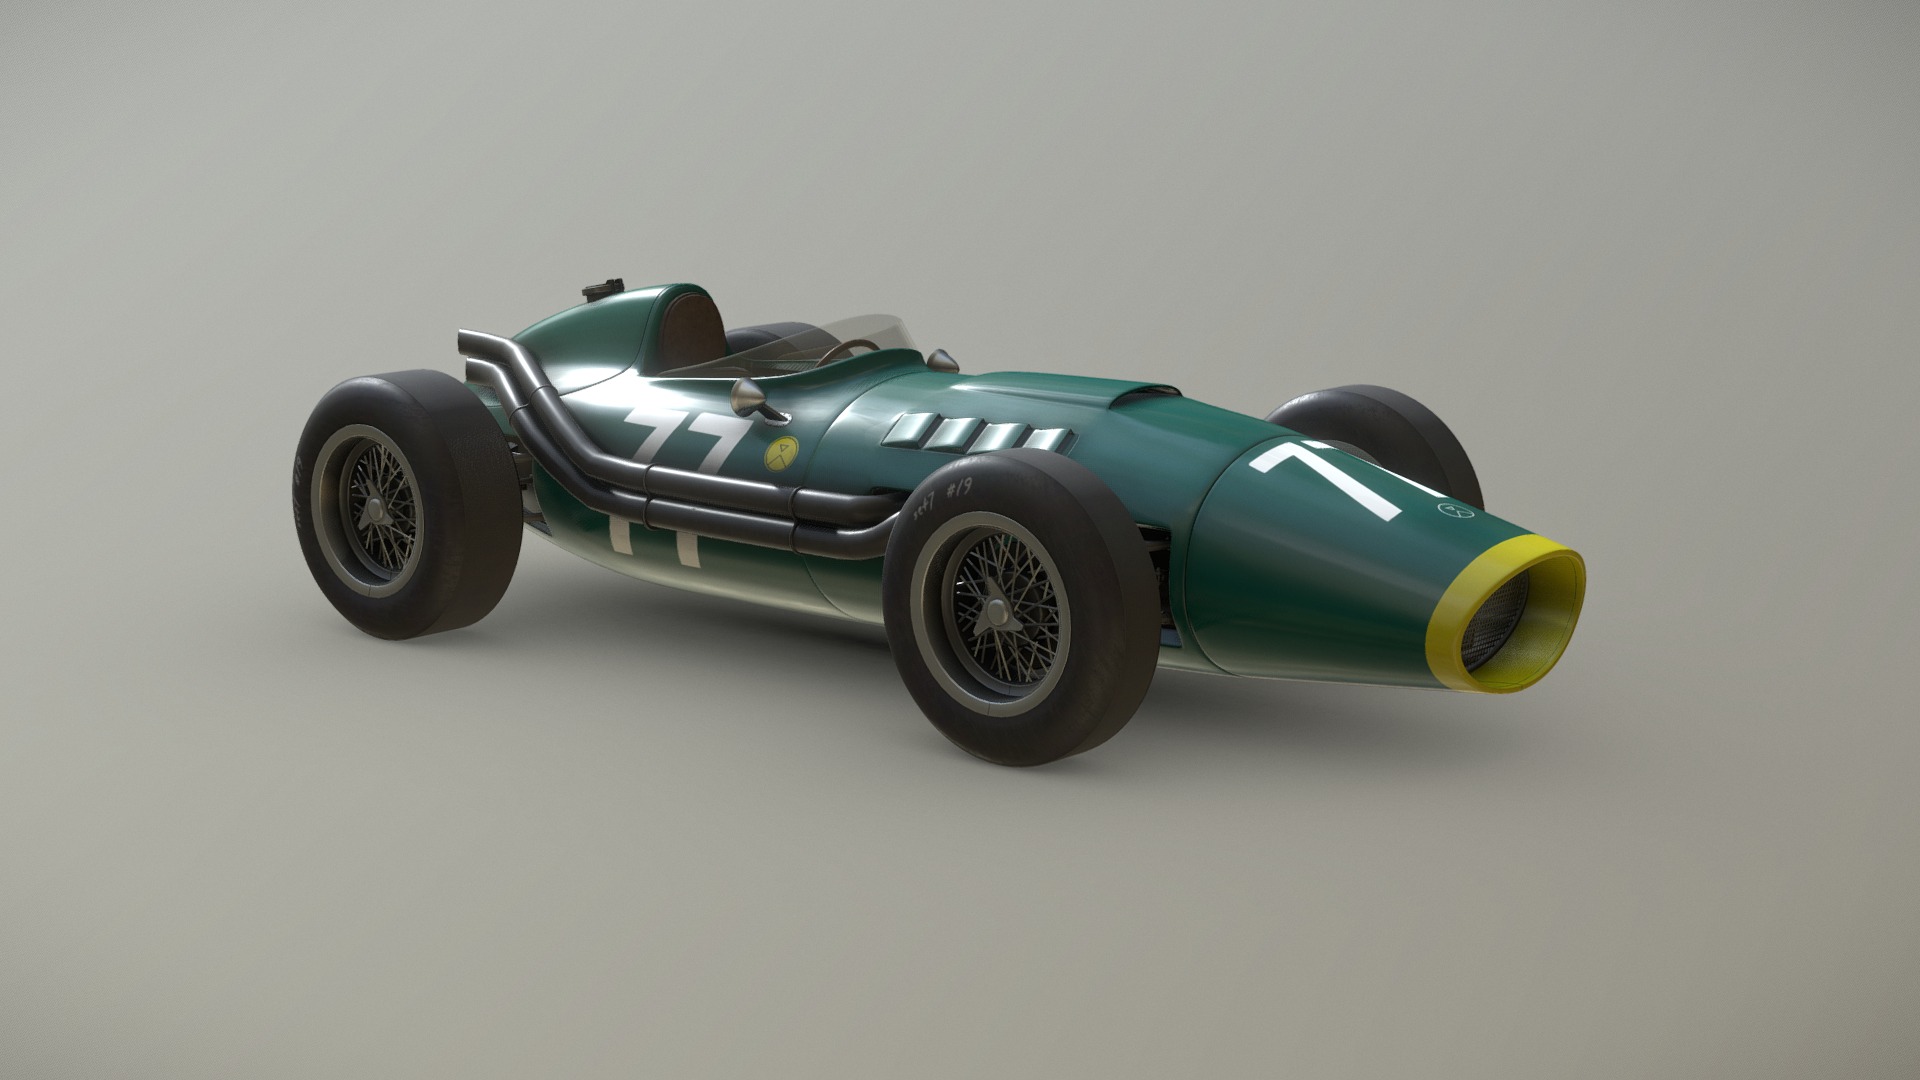 3D model F1 Vintage Concept Car - This is a 3D model of the F1 Vintage Concept Car. The 3D model is about a green toy car.